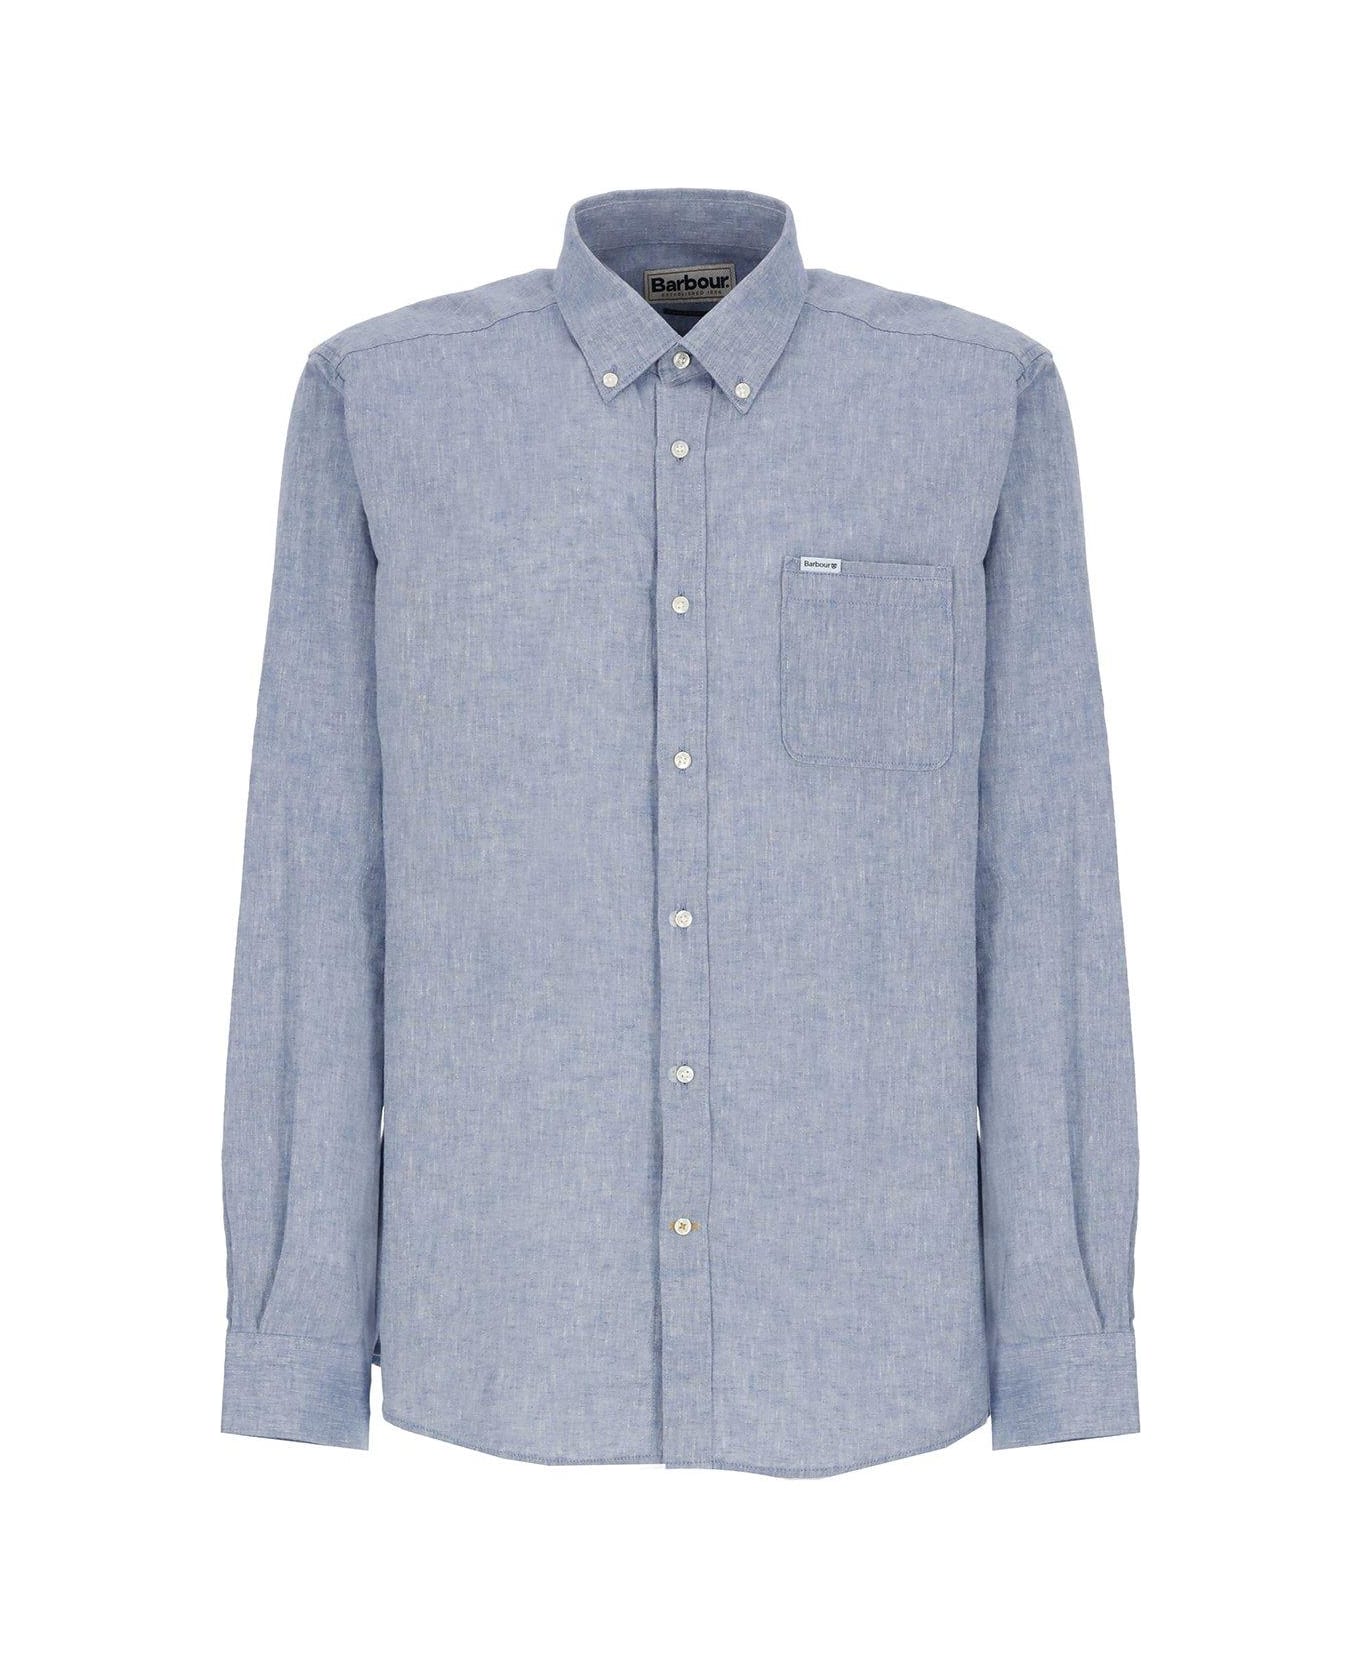 Barbour Buttoned Long-sleeved Shirt - Blue シャツ